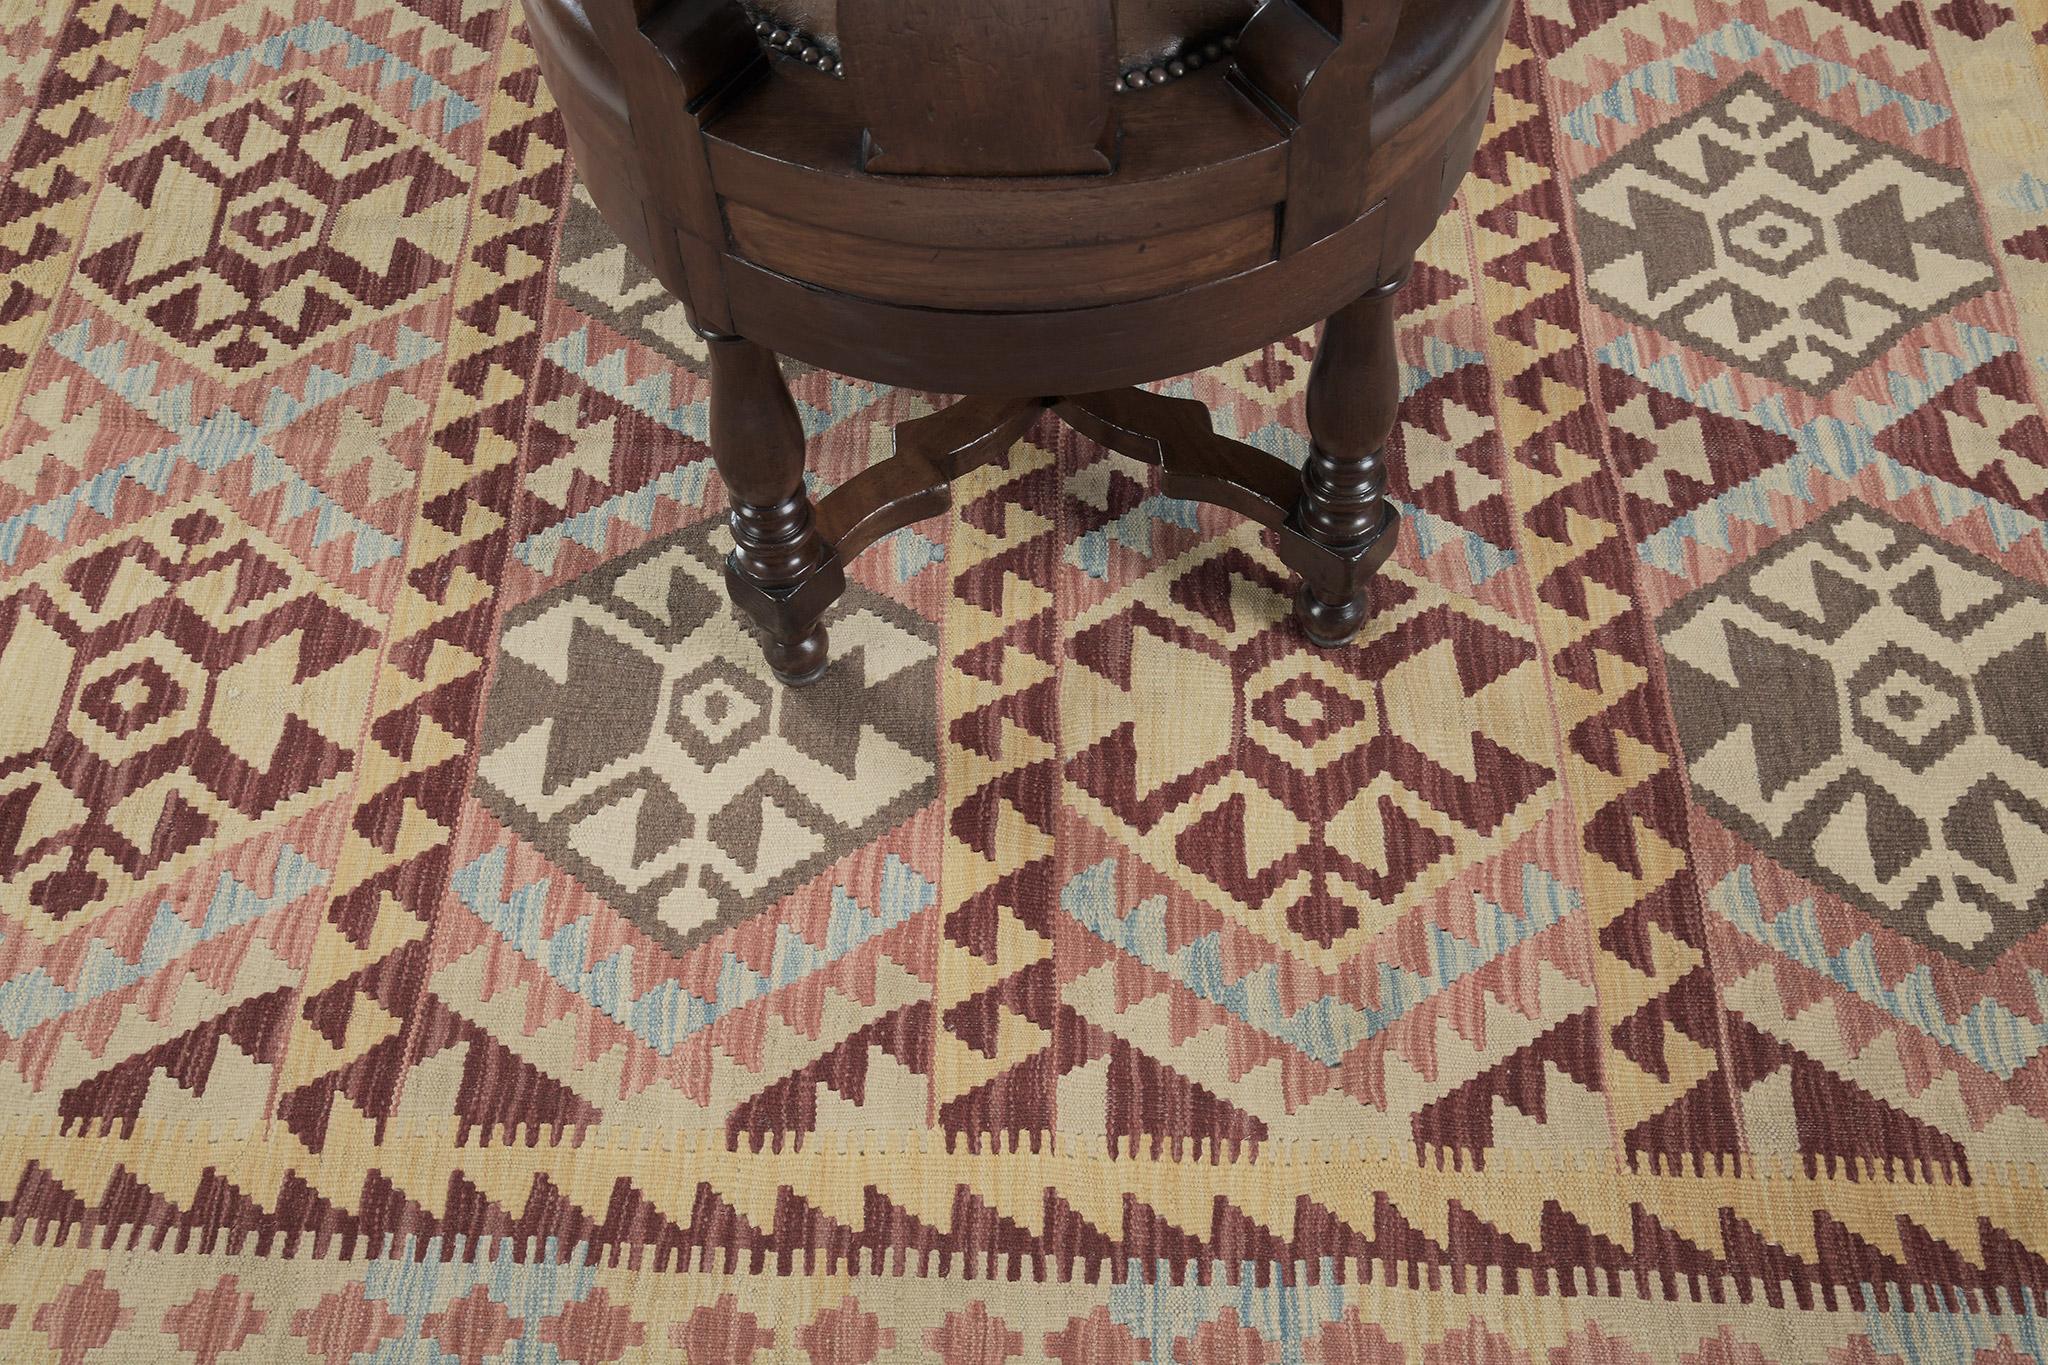 Our natural dyed flatweave Kilim in vintage style rug is inspired by tribal patterns. This kilim is a deal for flooring or wall applications. It is adorned with crab motifs in multicolored schemes and surrounded by zigzag patterns that make this rug